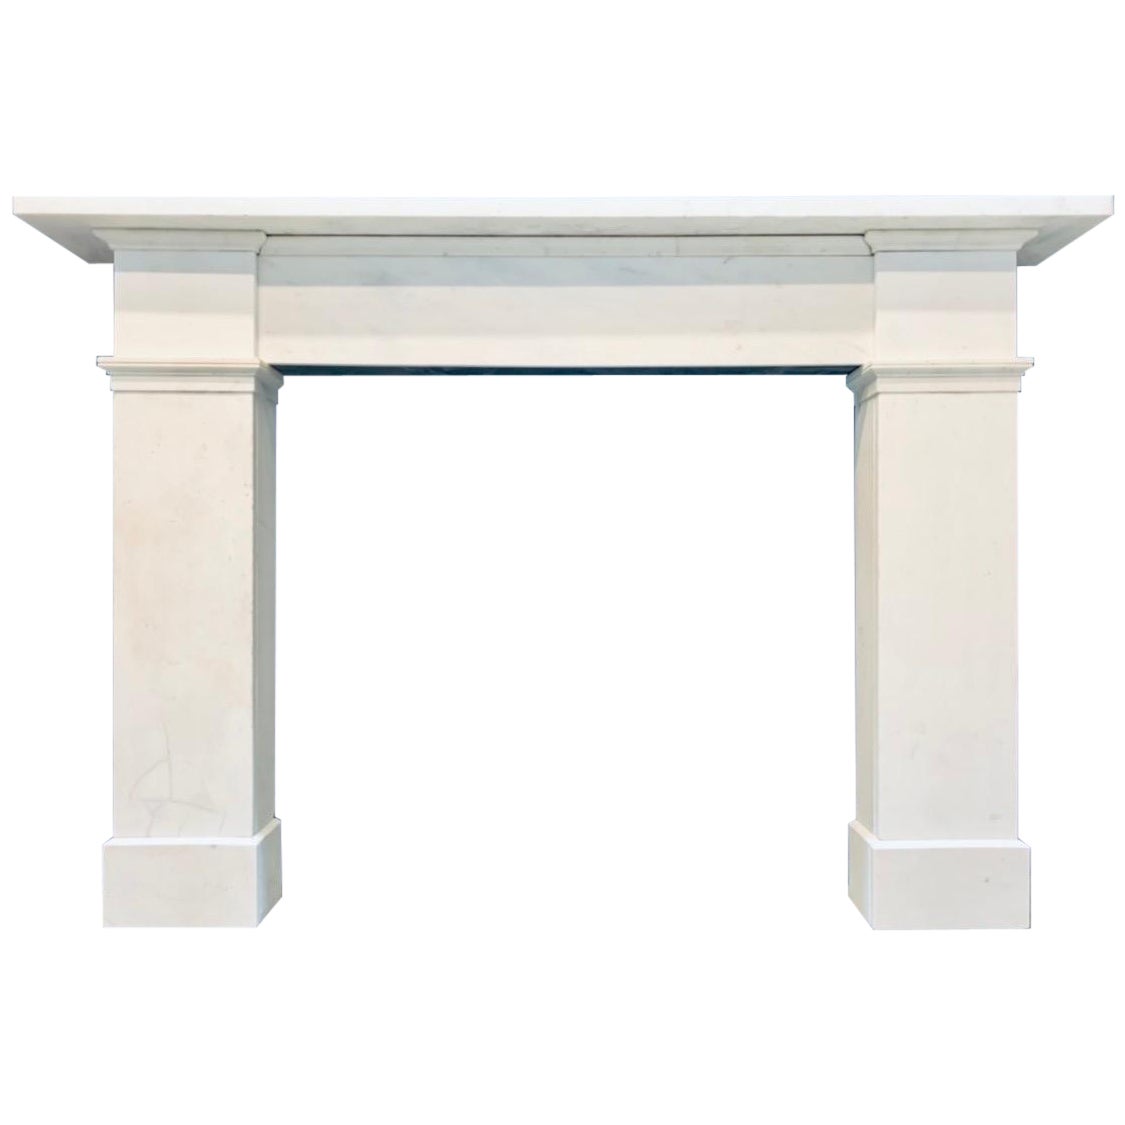 A Large Scottish Early 19th Century Georgian Statuary Marble Fireplace Surround.